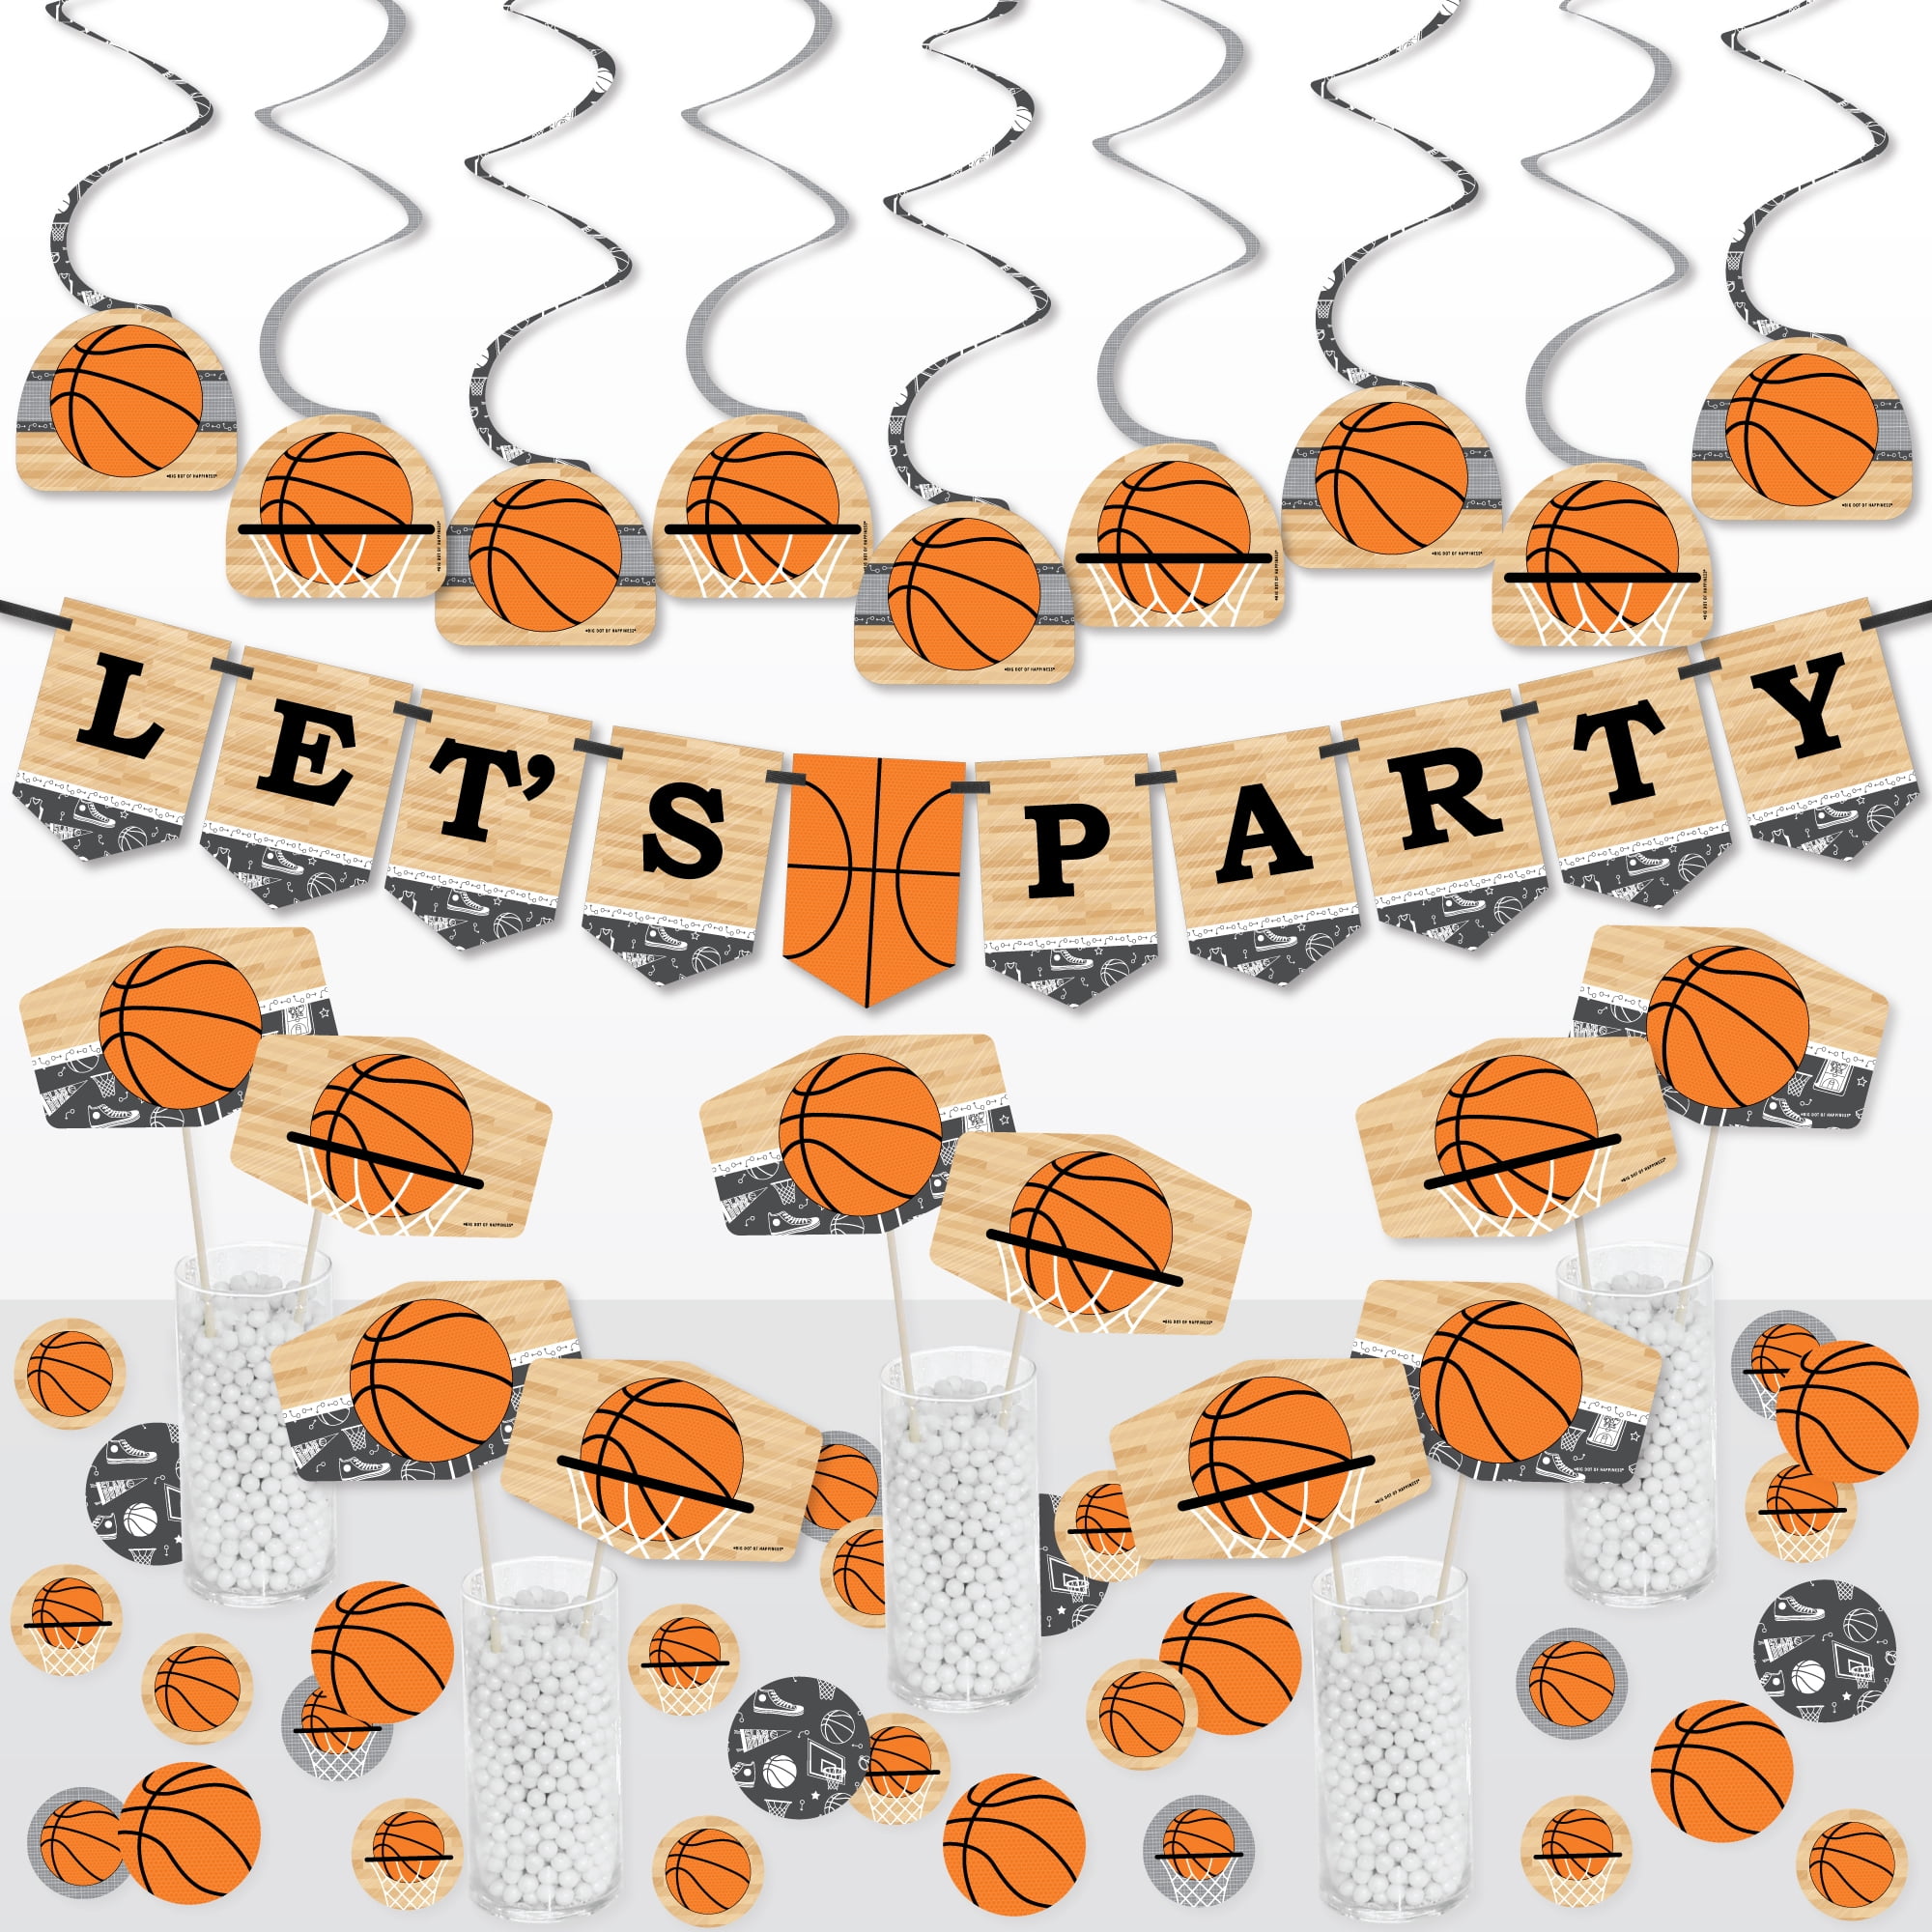 72 Pc Basketball Party Favors for Kids - 12 Serve Mini Basketball,  Wristbands, Game Pass, Basketball Party Box, Temporary Tattoos for Boys  Girls Basketball Birthday Party Supplies 